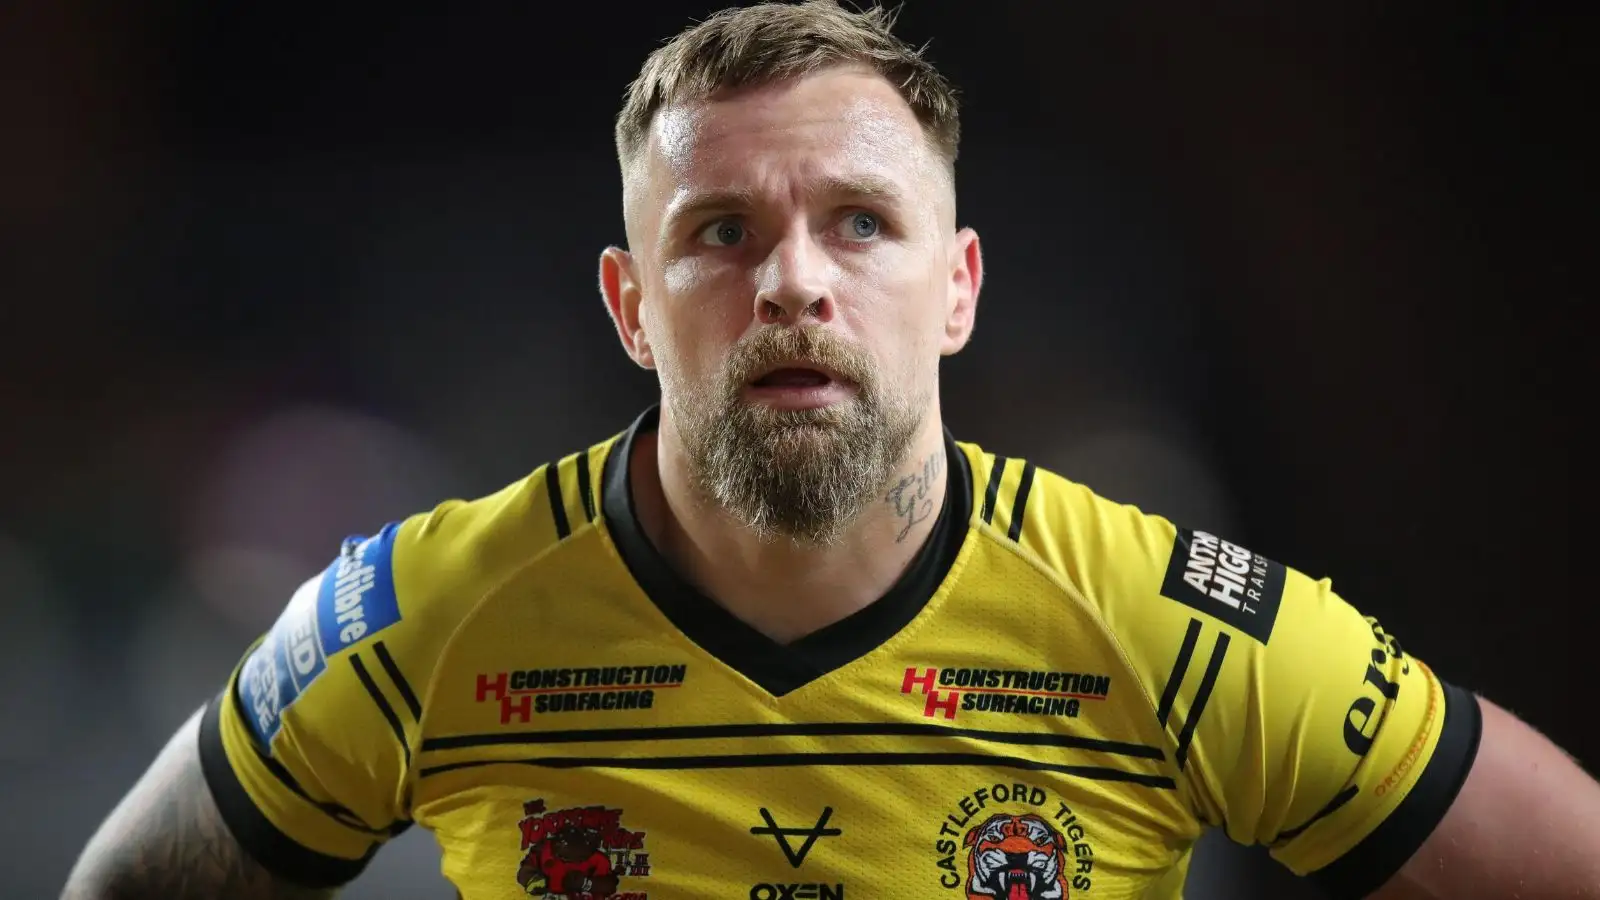 Castleford Tigers confirm four players to depart upon expiry of loan periods, including Blake Austin